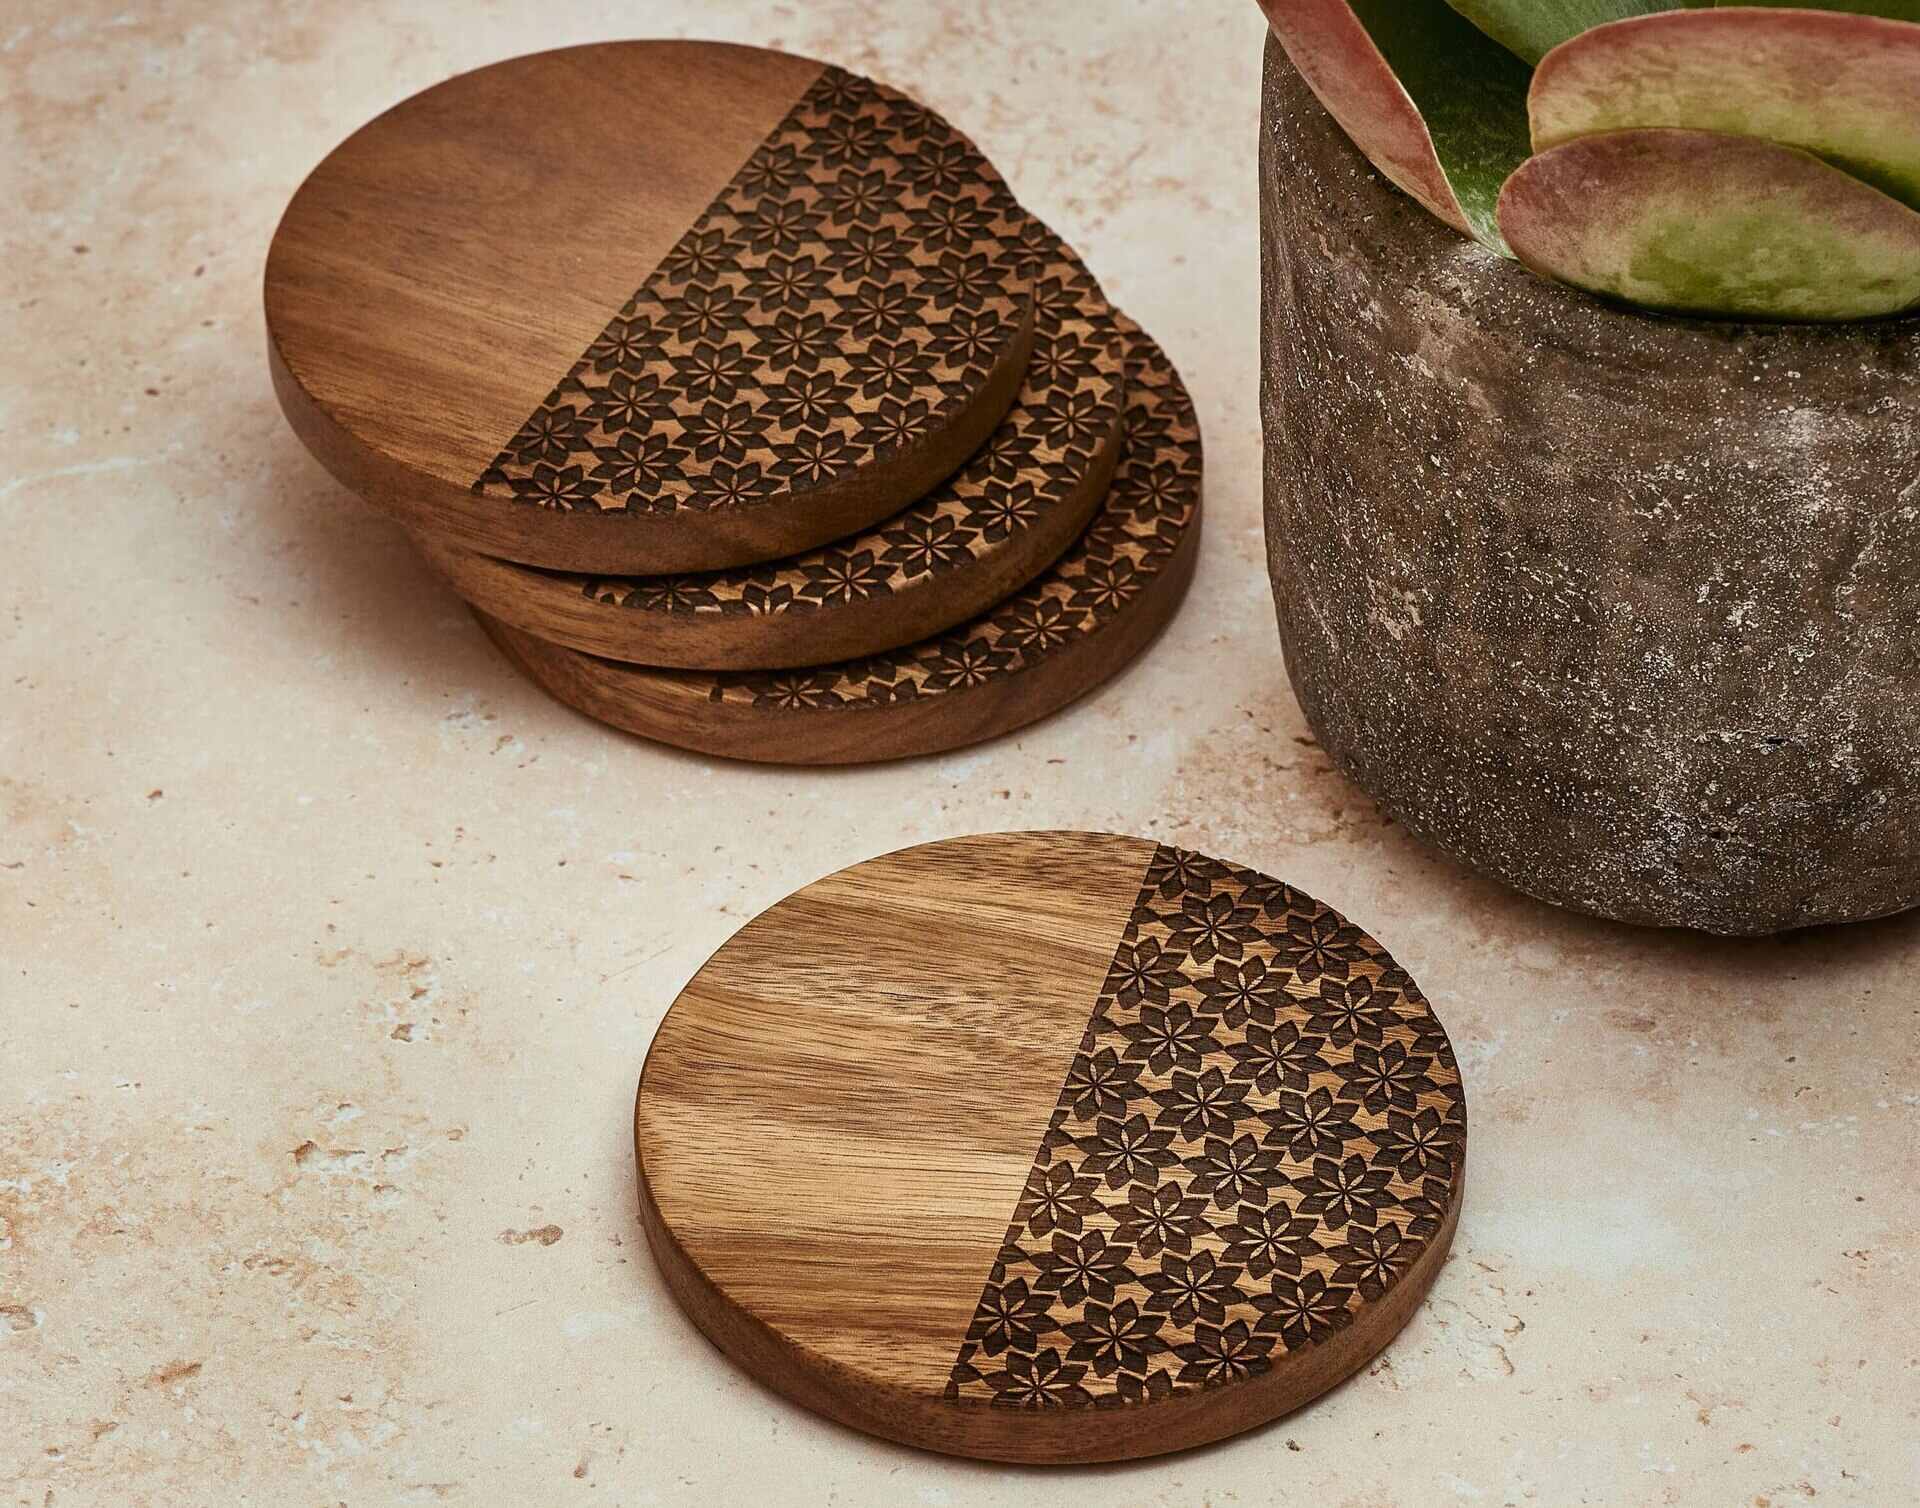 Acacia Wood Coasters for Drinks with Iron Holder Stand Set of 4, Wooden  Coasters